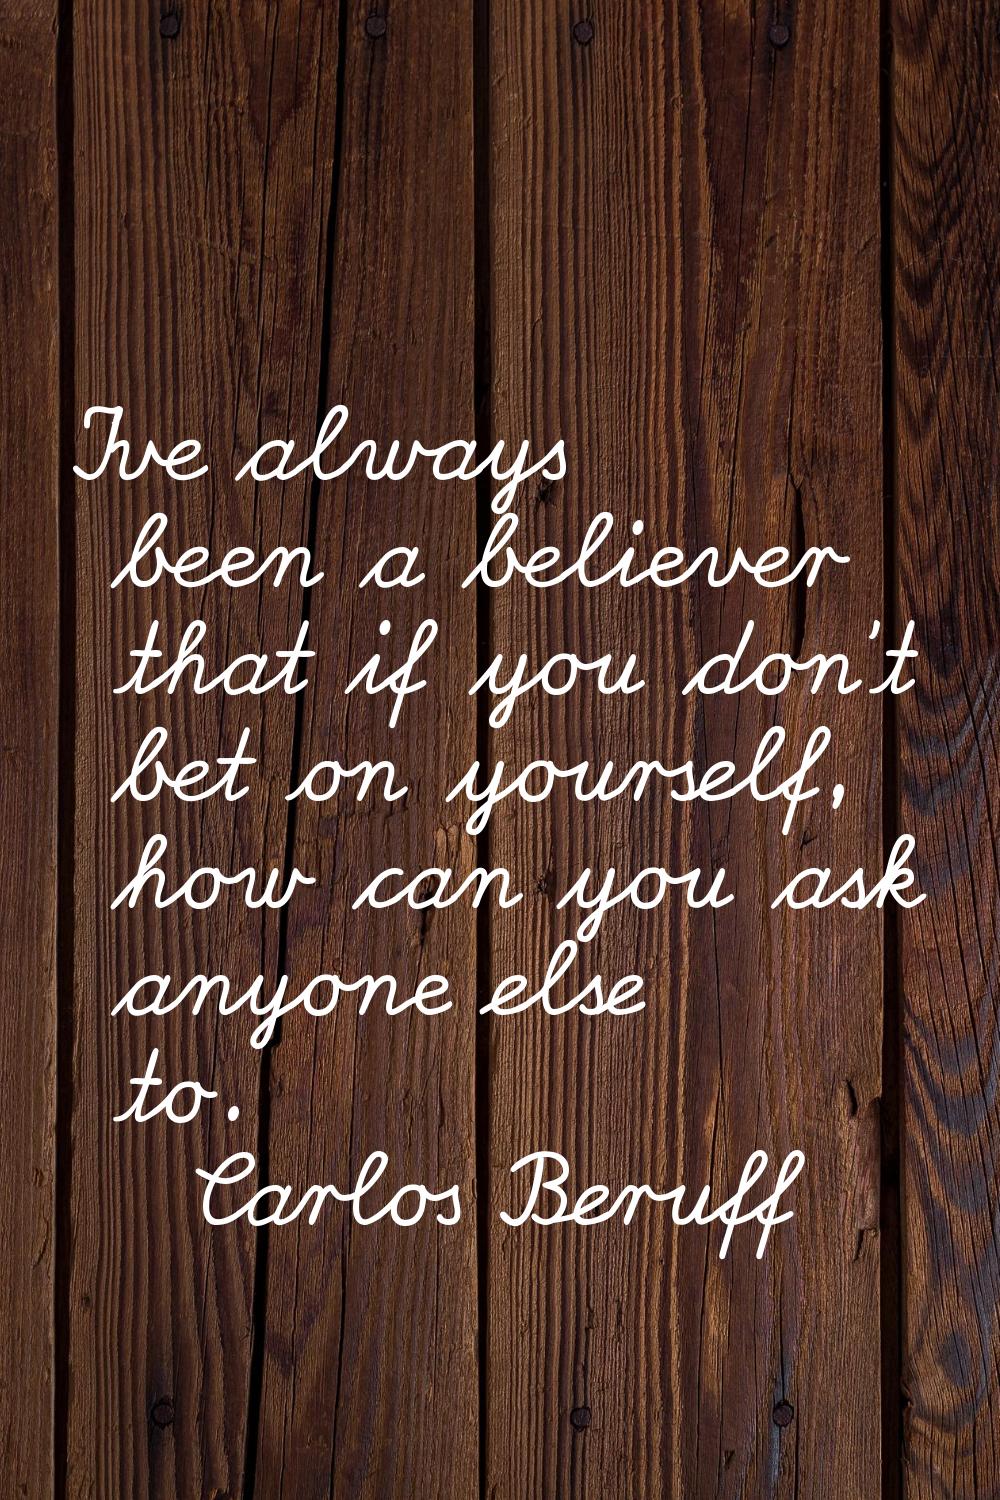 I've always been a believer that if you don't bet on yourself, how can you ask anyone else to.